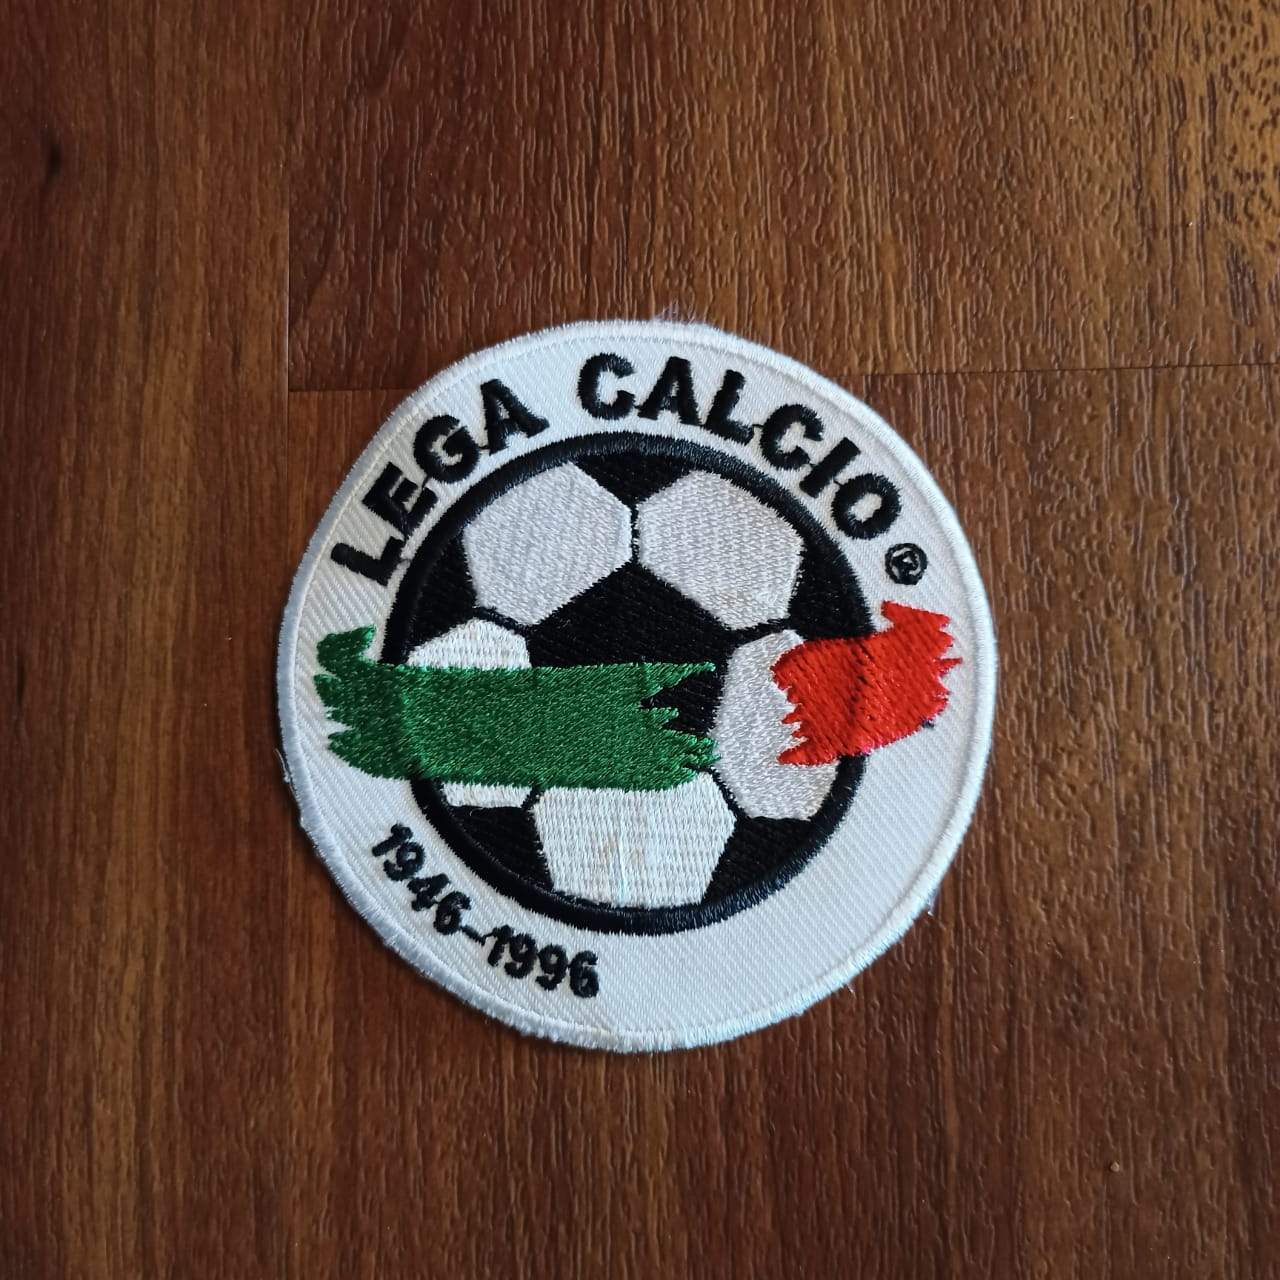 1996 Serie A Italy Patch